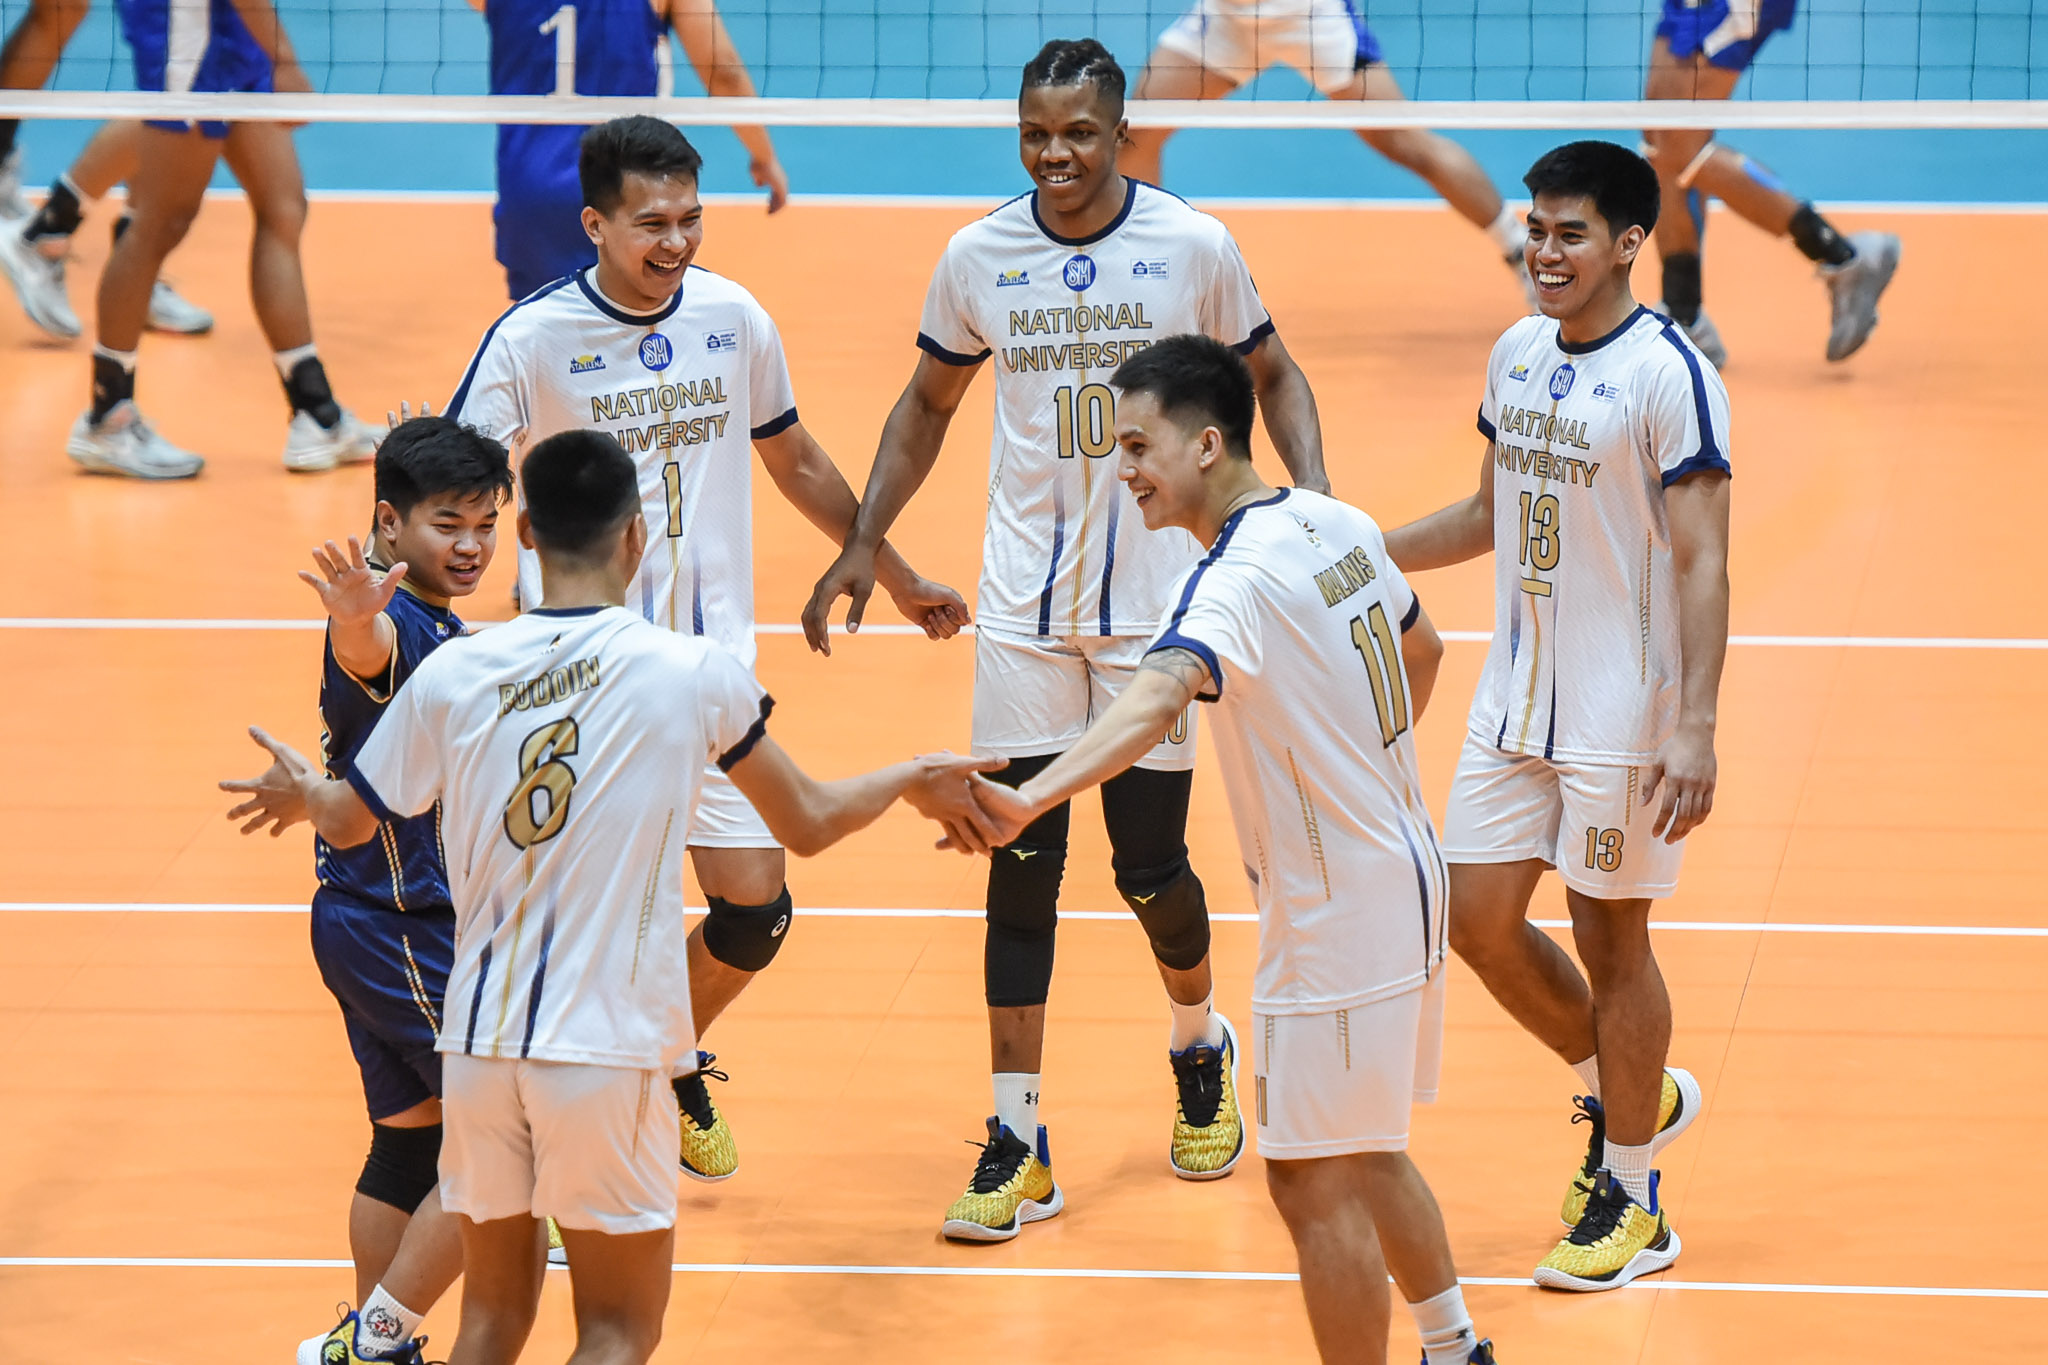 UAAP NU sweeps mens volleyball elimination round, books Finals spot after trouncing Ateneo Inquirer Sports